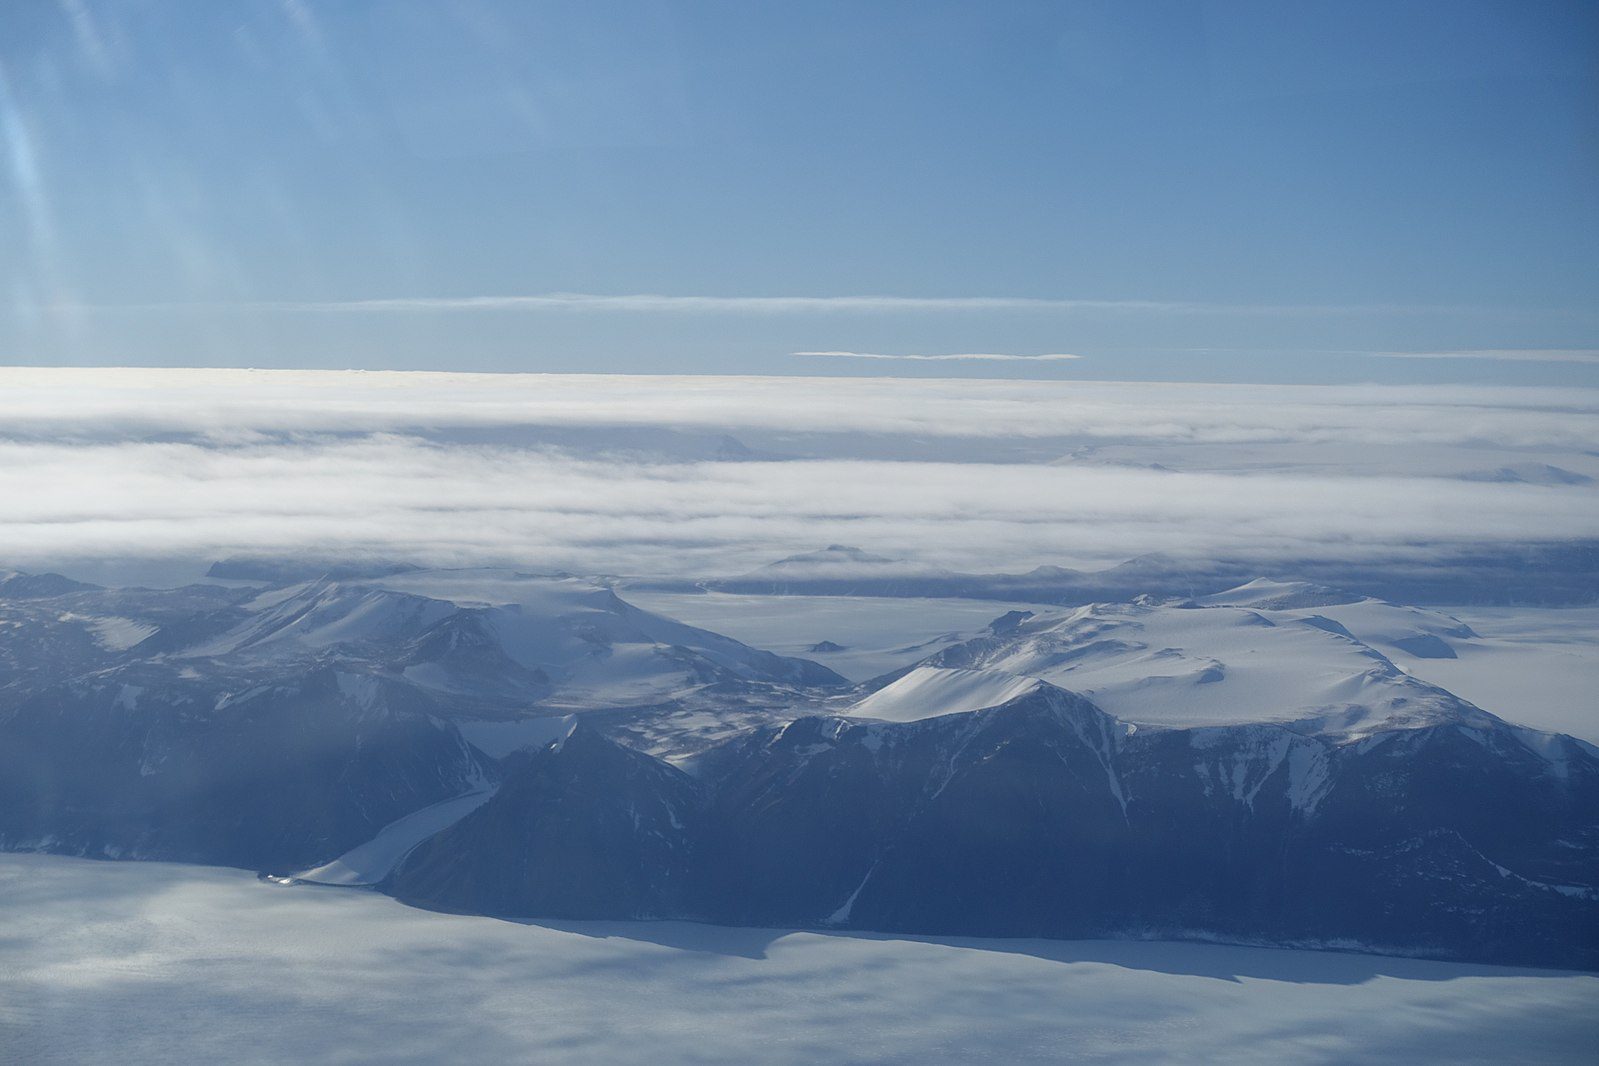 Transantarctic Mountains November 2019 A 5 Million Year Old Ice Core Sample Reveals Truths About Earths Ancient Atmosphere